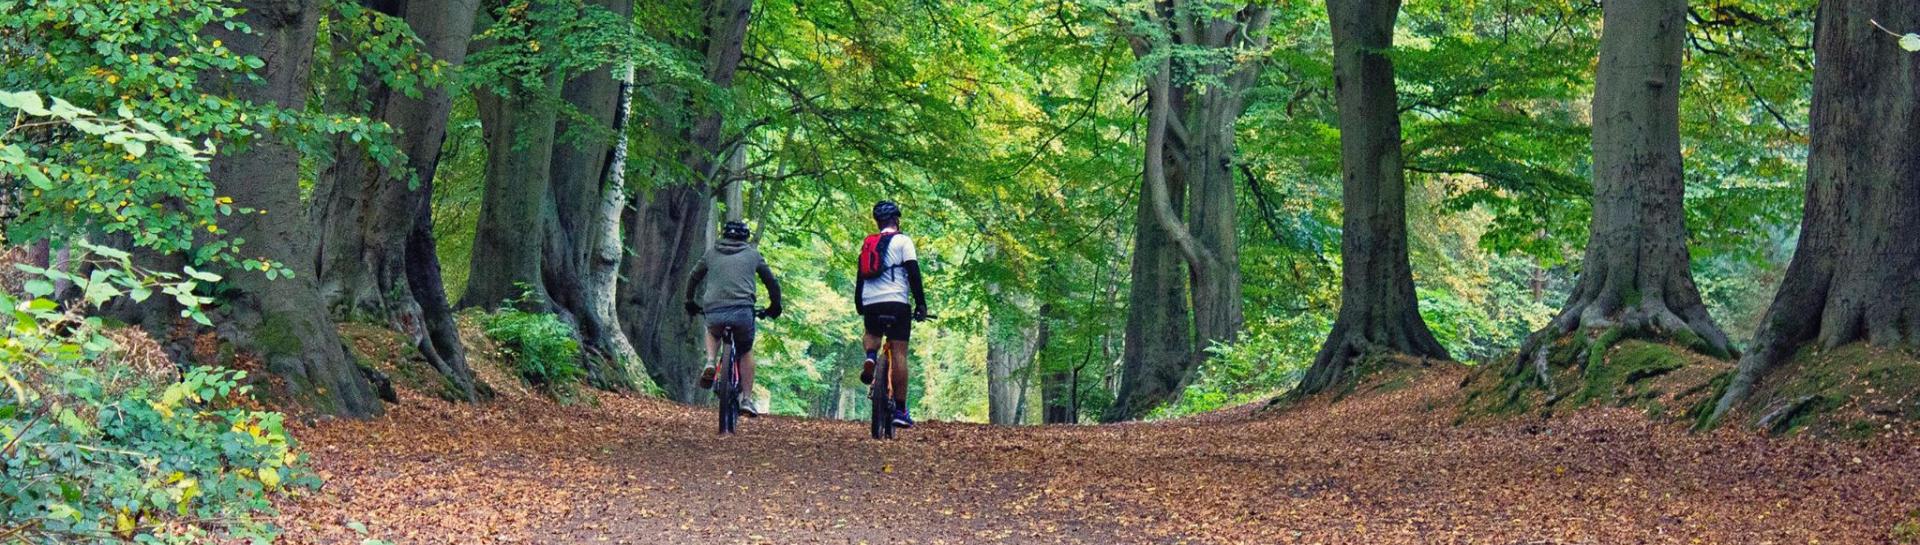 Cycling in Northamptonshire Forest (Harlestone Firs)